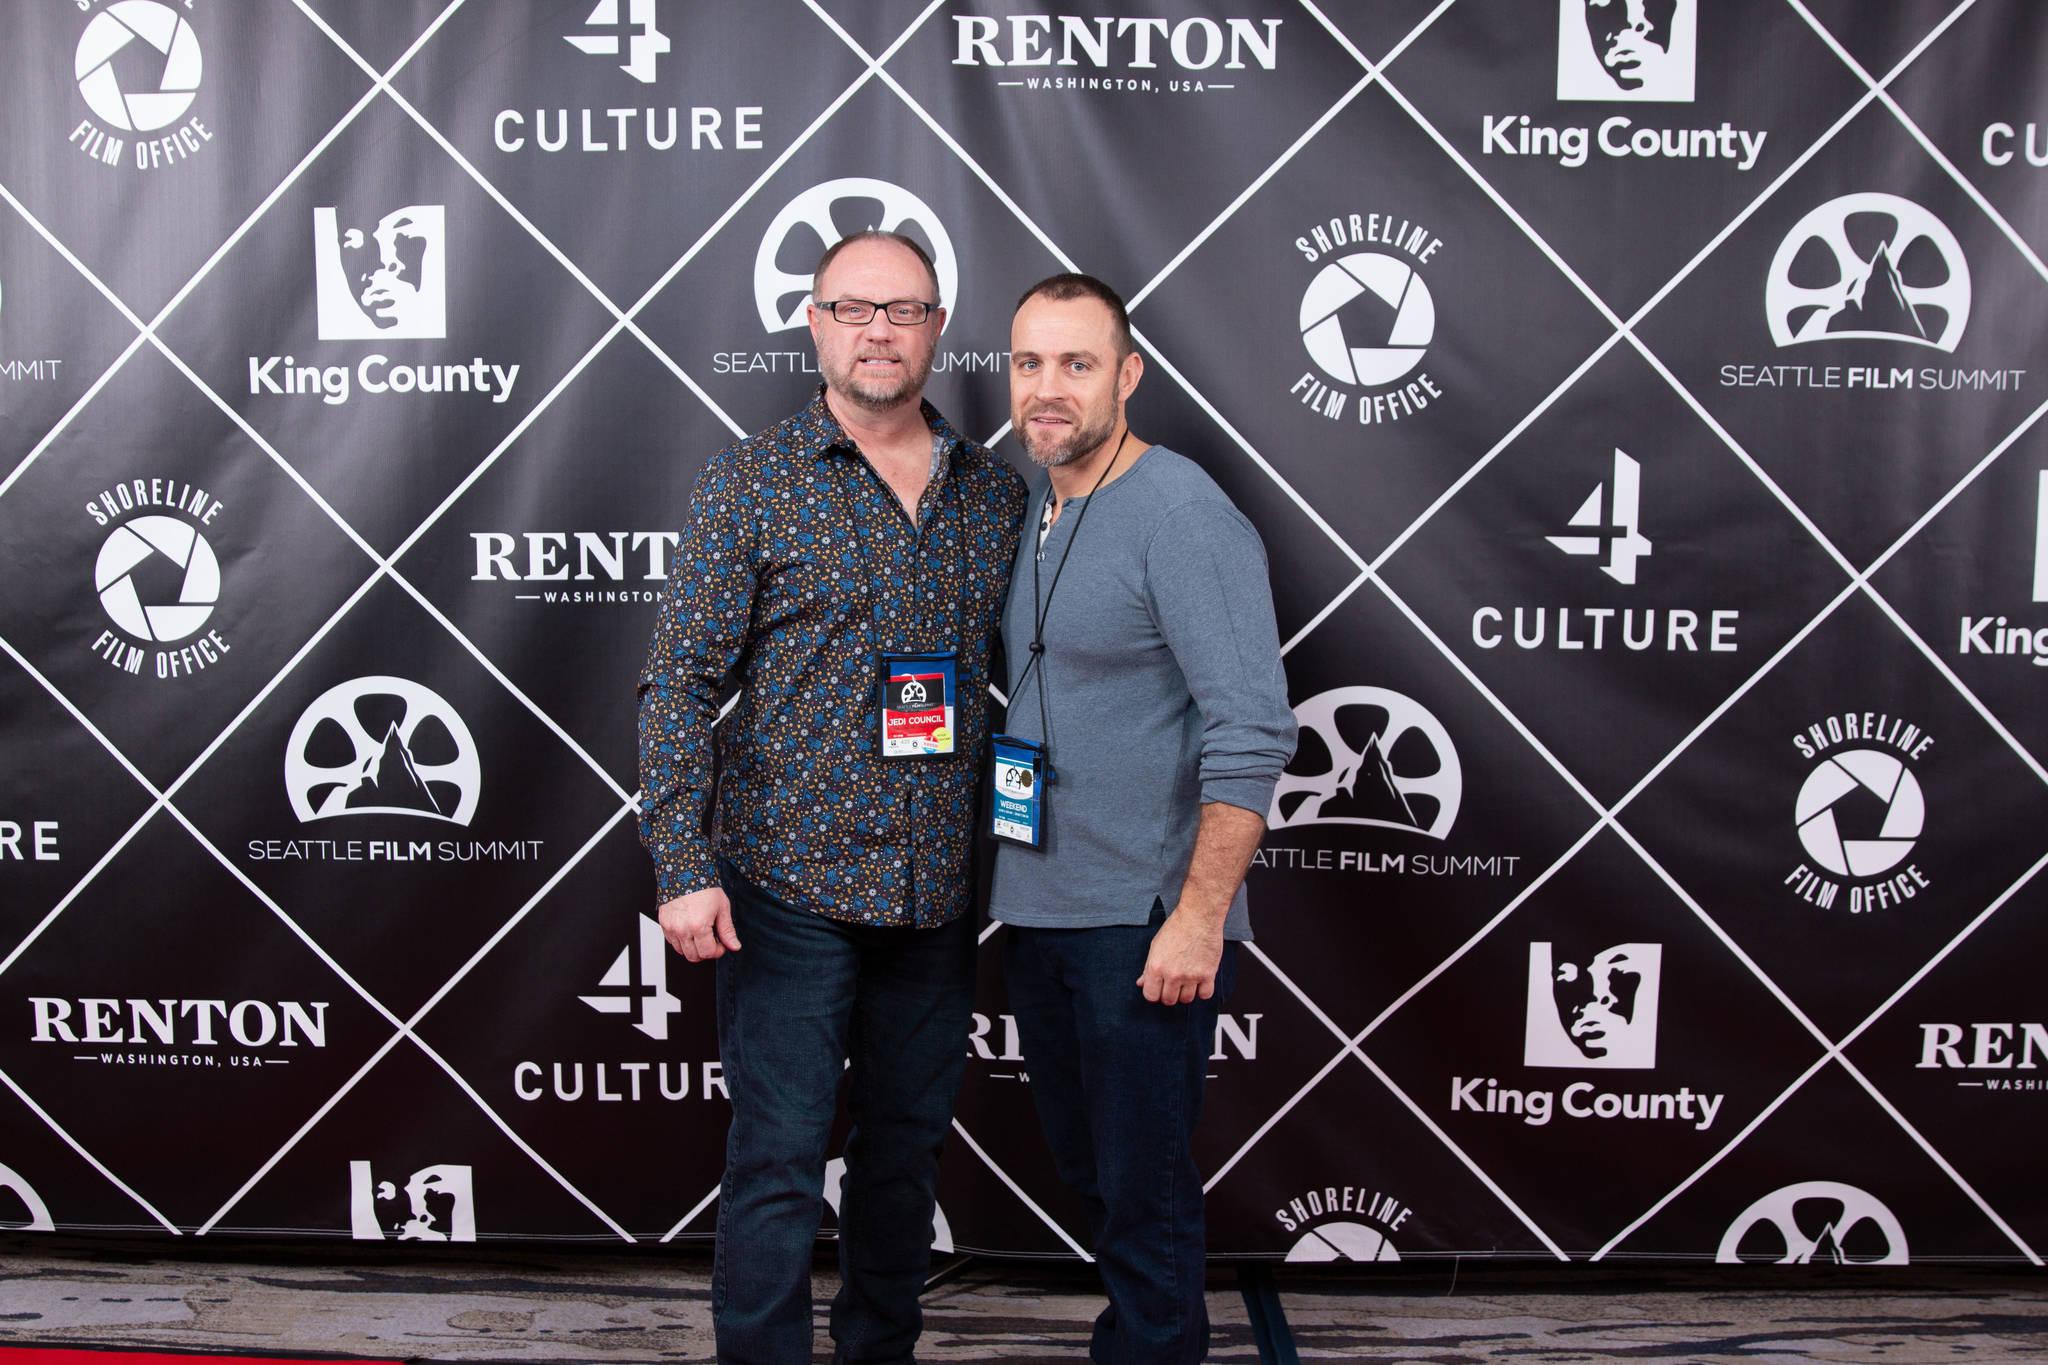 Seattle Film Summit organizers Chad Hutson (left) and Ben Andrews (right) - (courtesy of Seattle Film Summit)